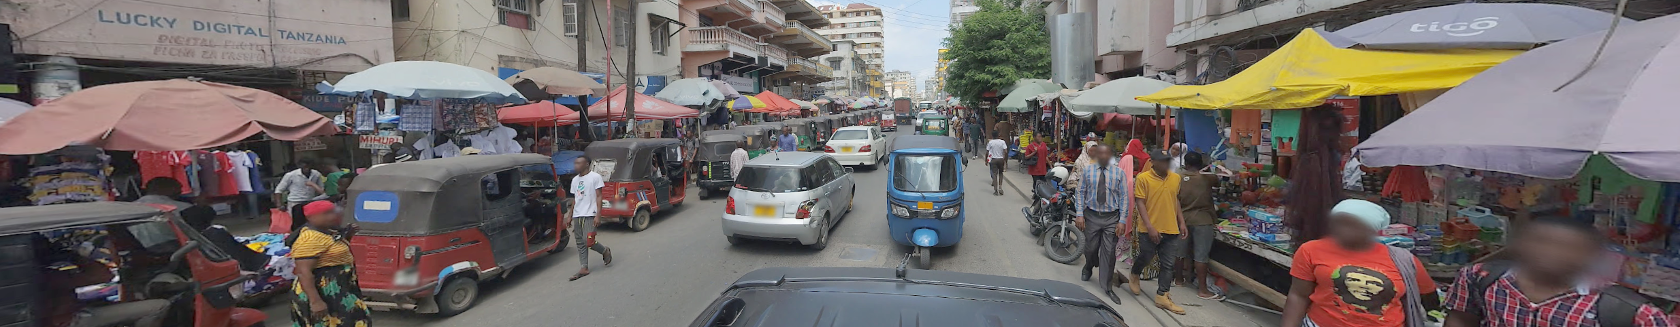 Google Street View contributes to the empowering of communities in Zanzibar through the Global National Tour tool